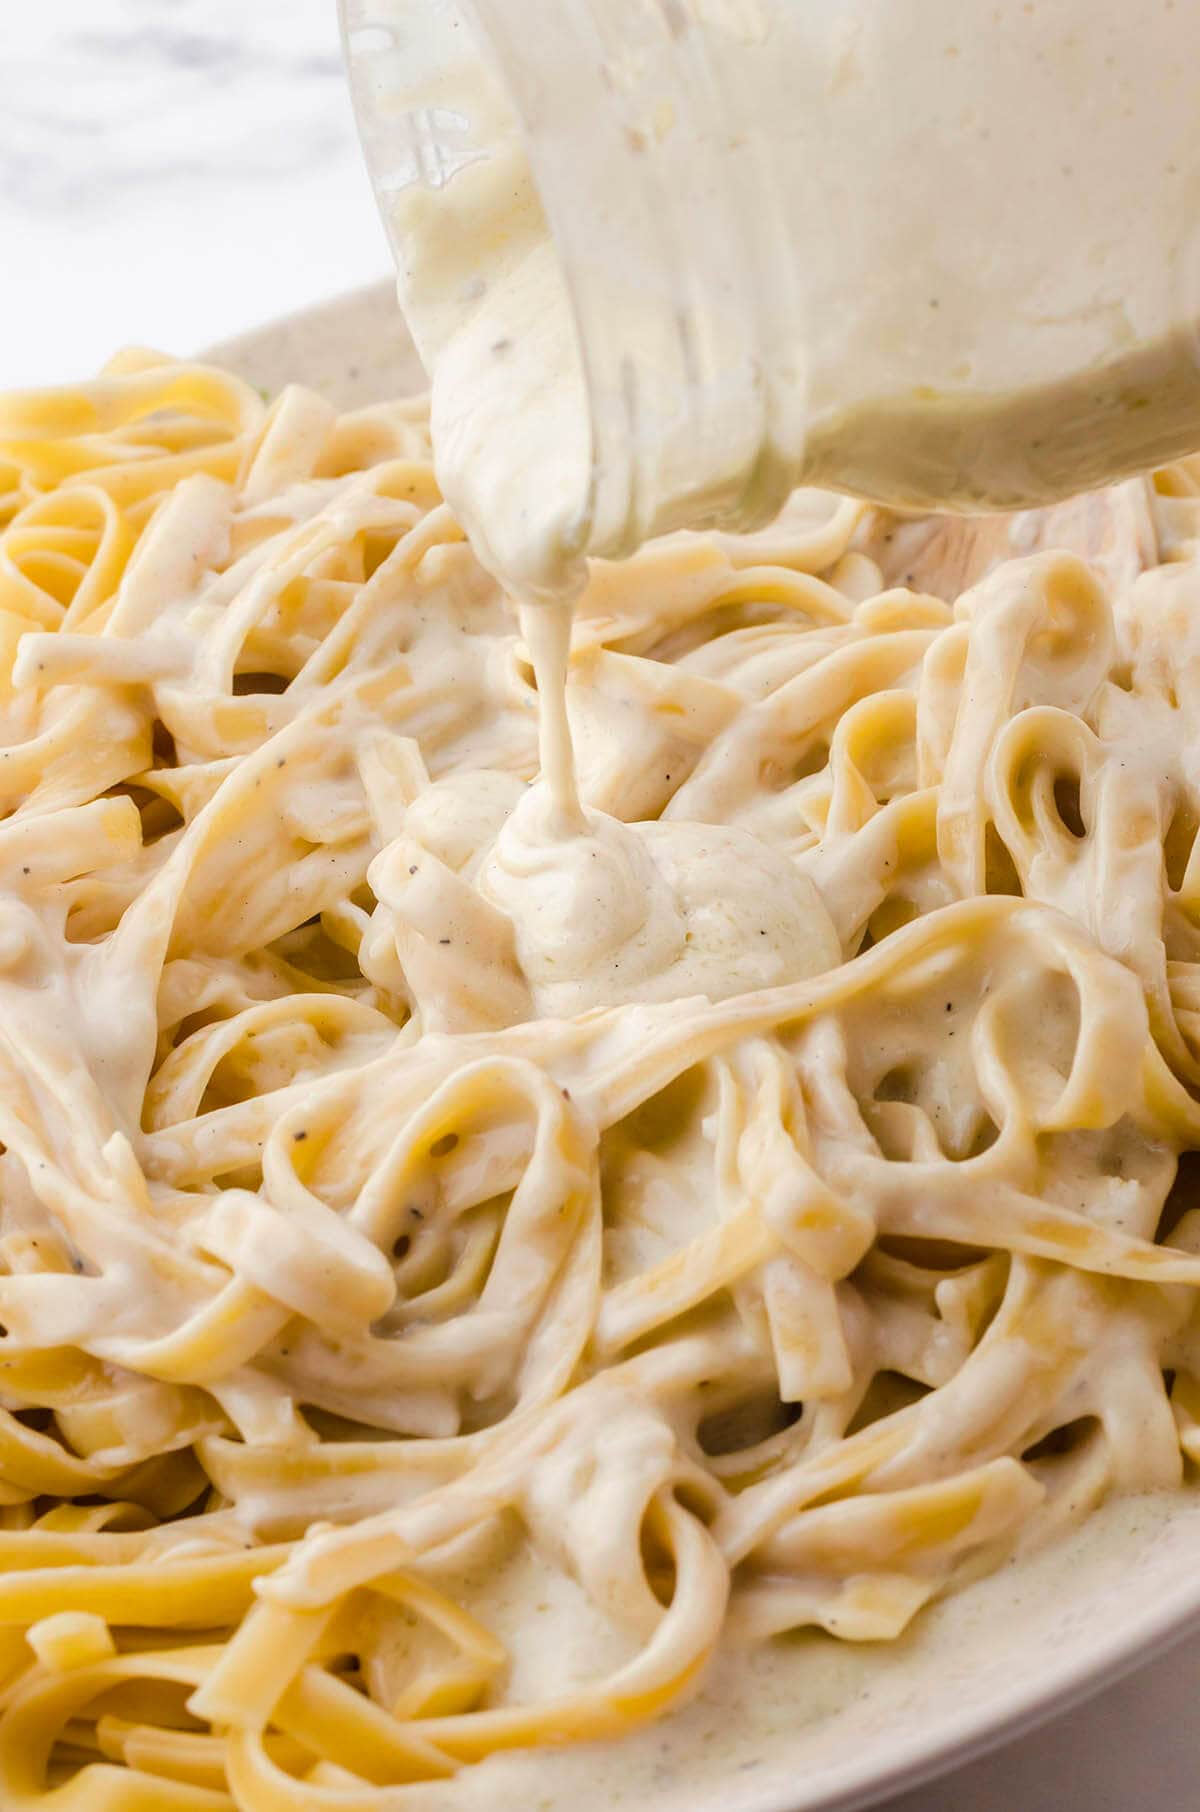 Platter of fettuccini pasta with Alfredo Sauce being poured over it.